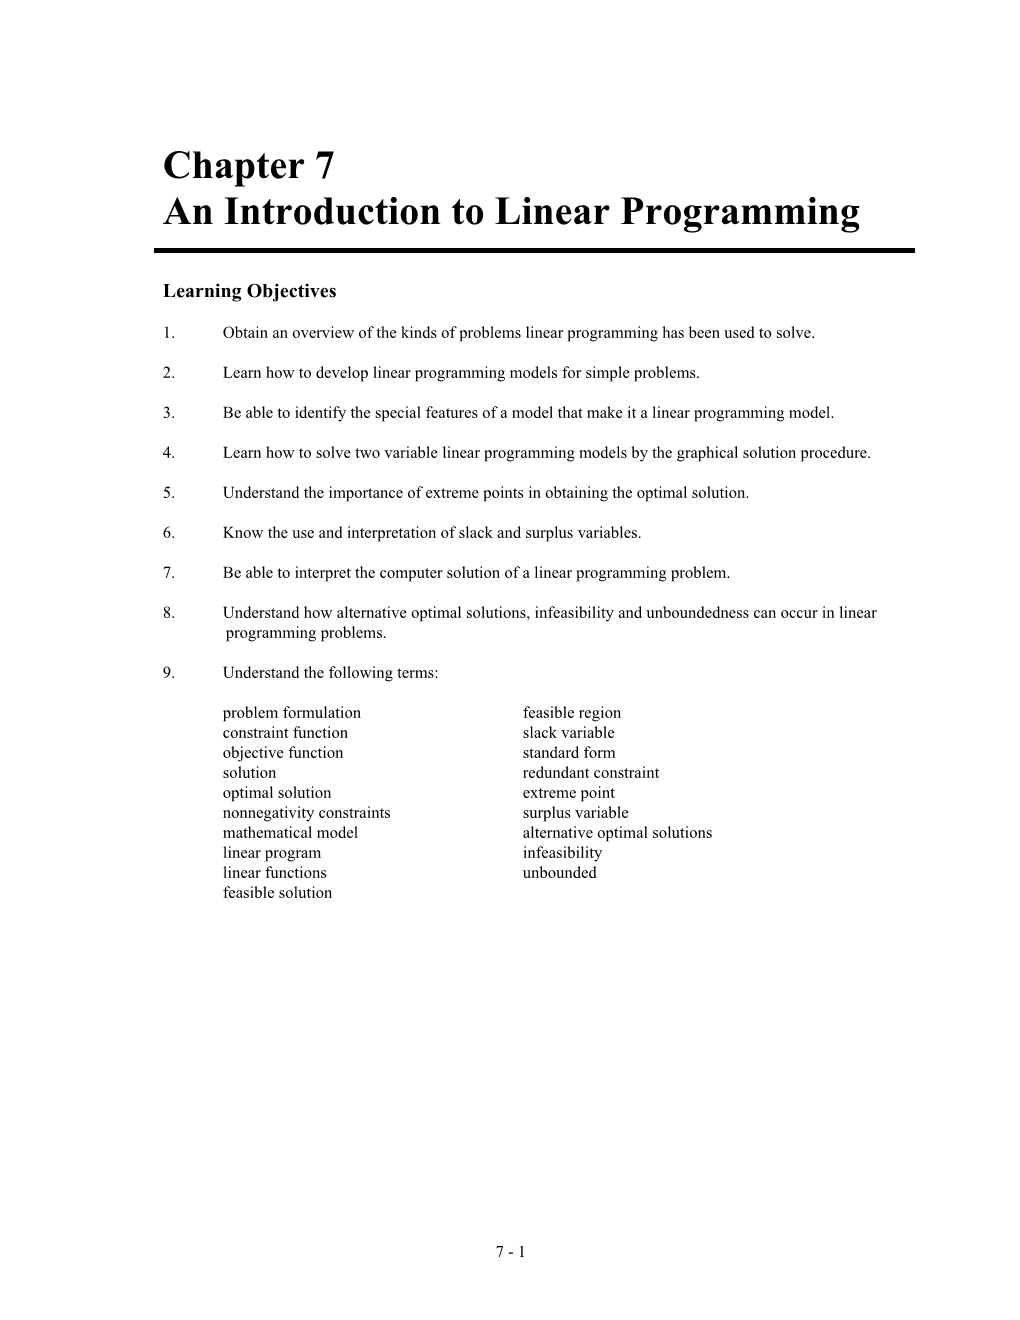 An Introduction to Linear Programming